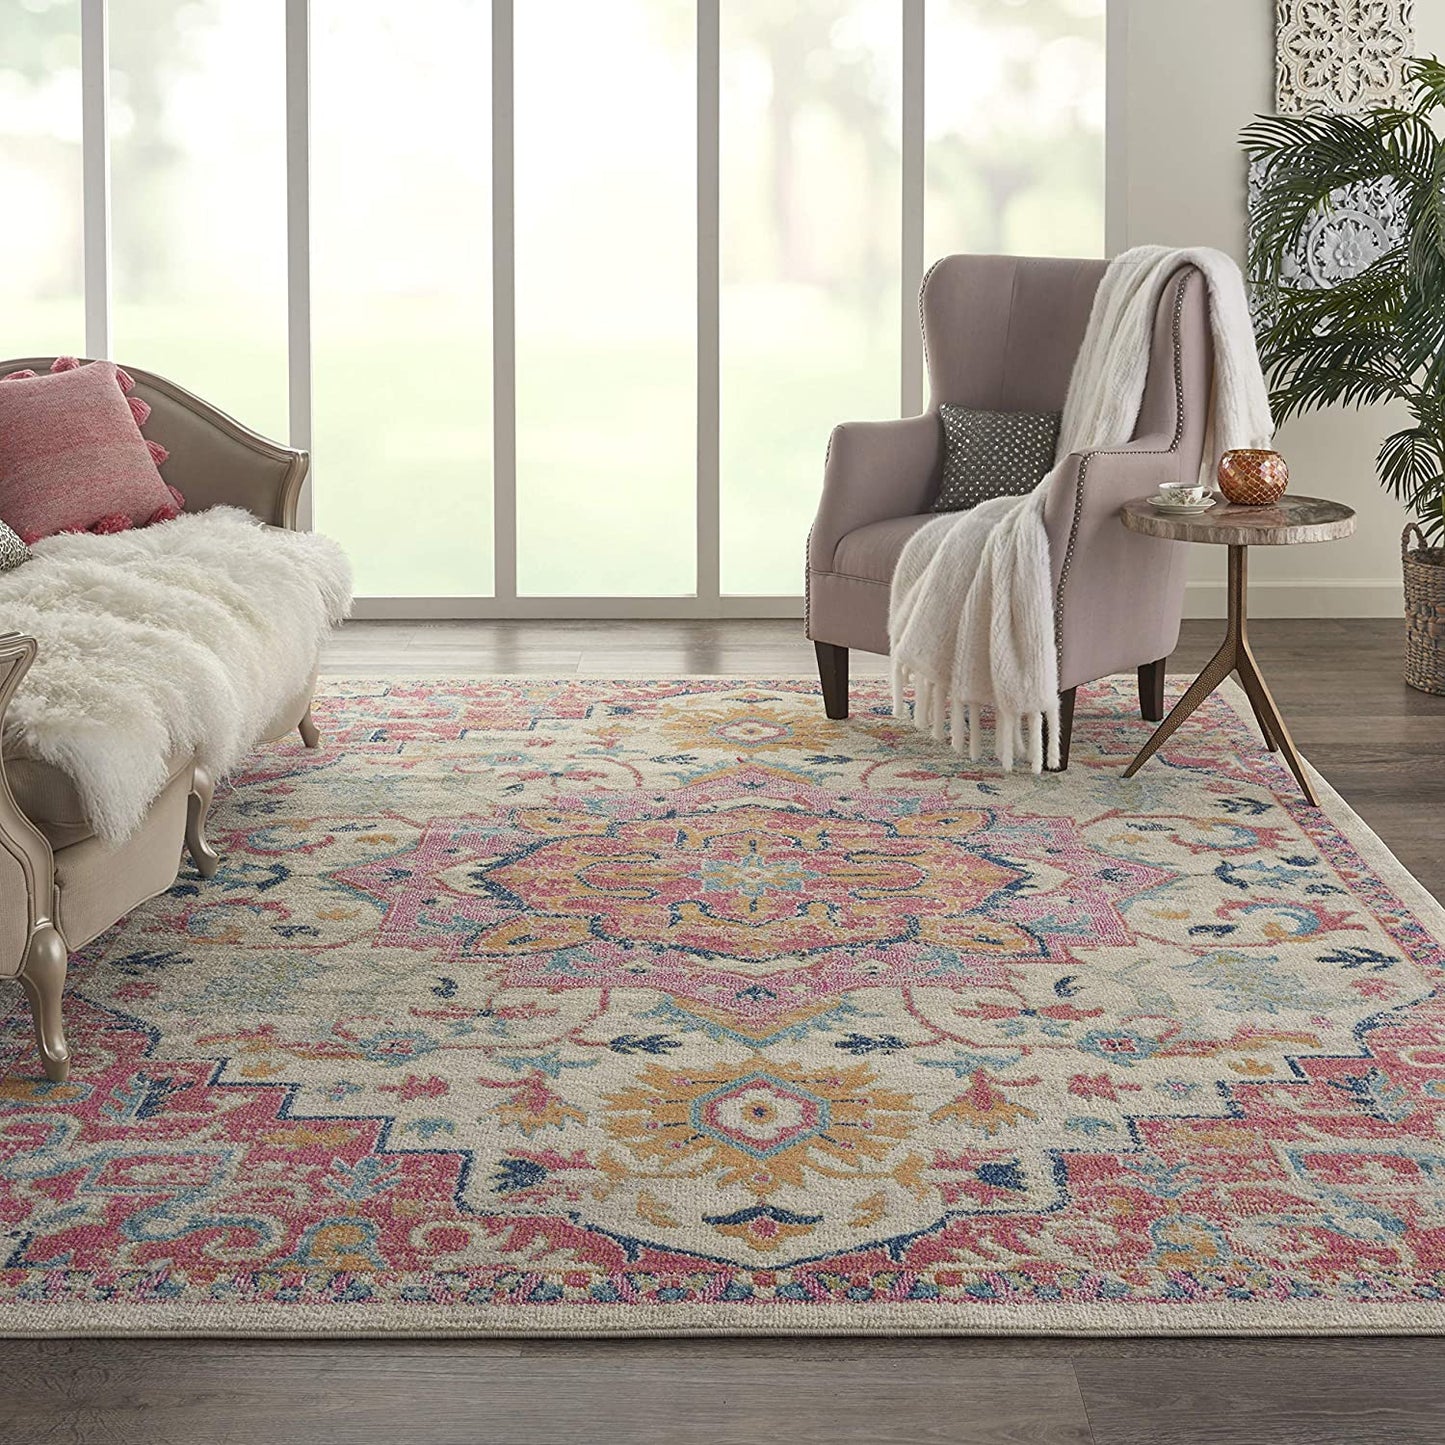 Floral Medallion Passion Bordered Ivory/Pink Area Rug